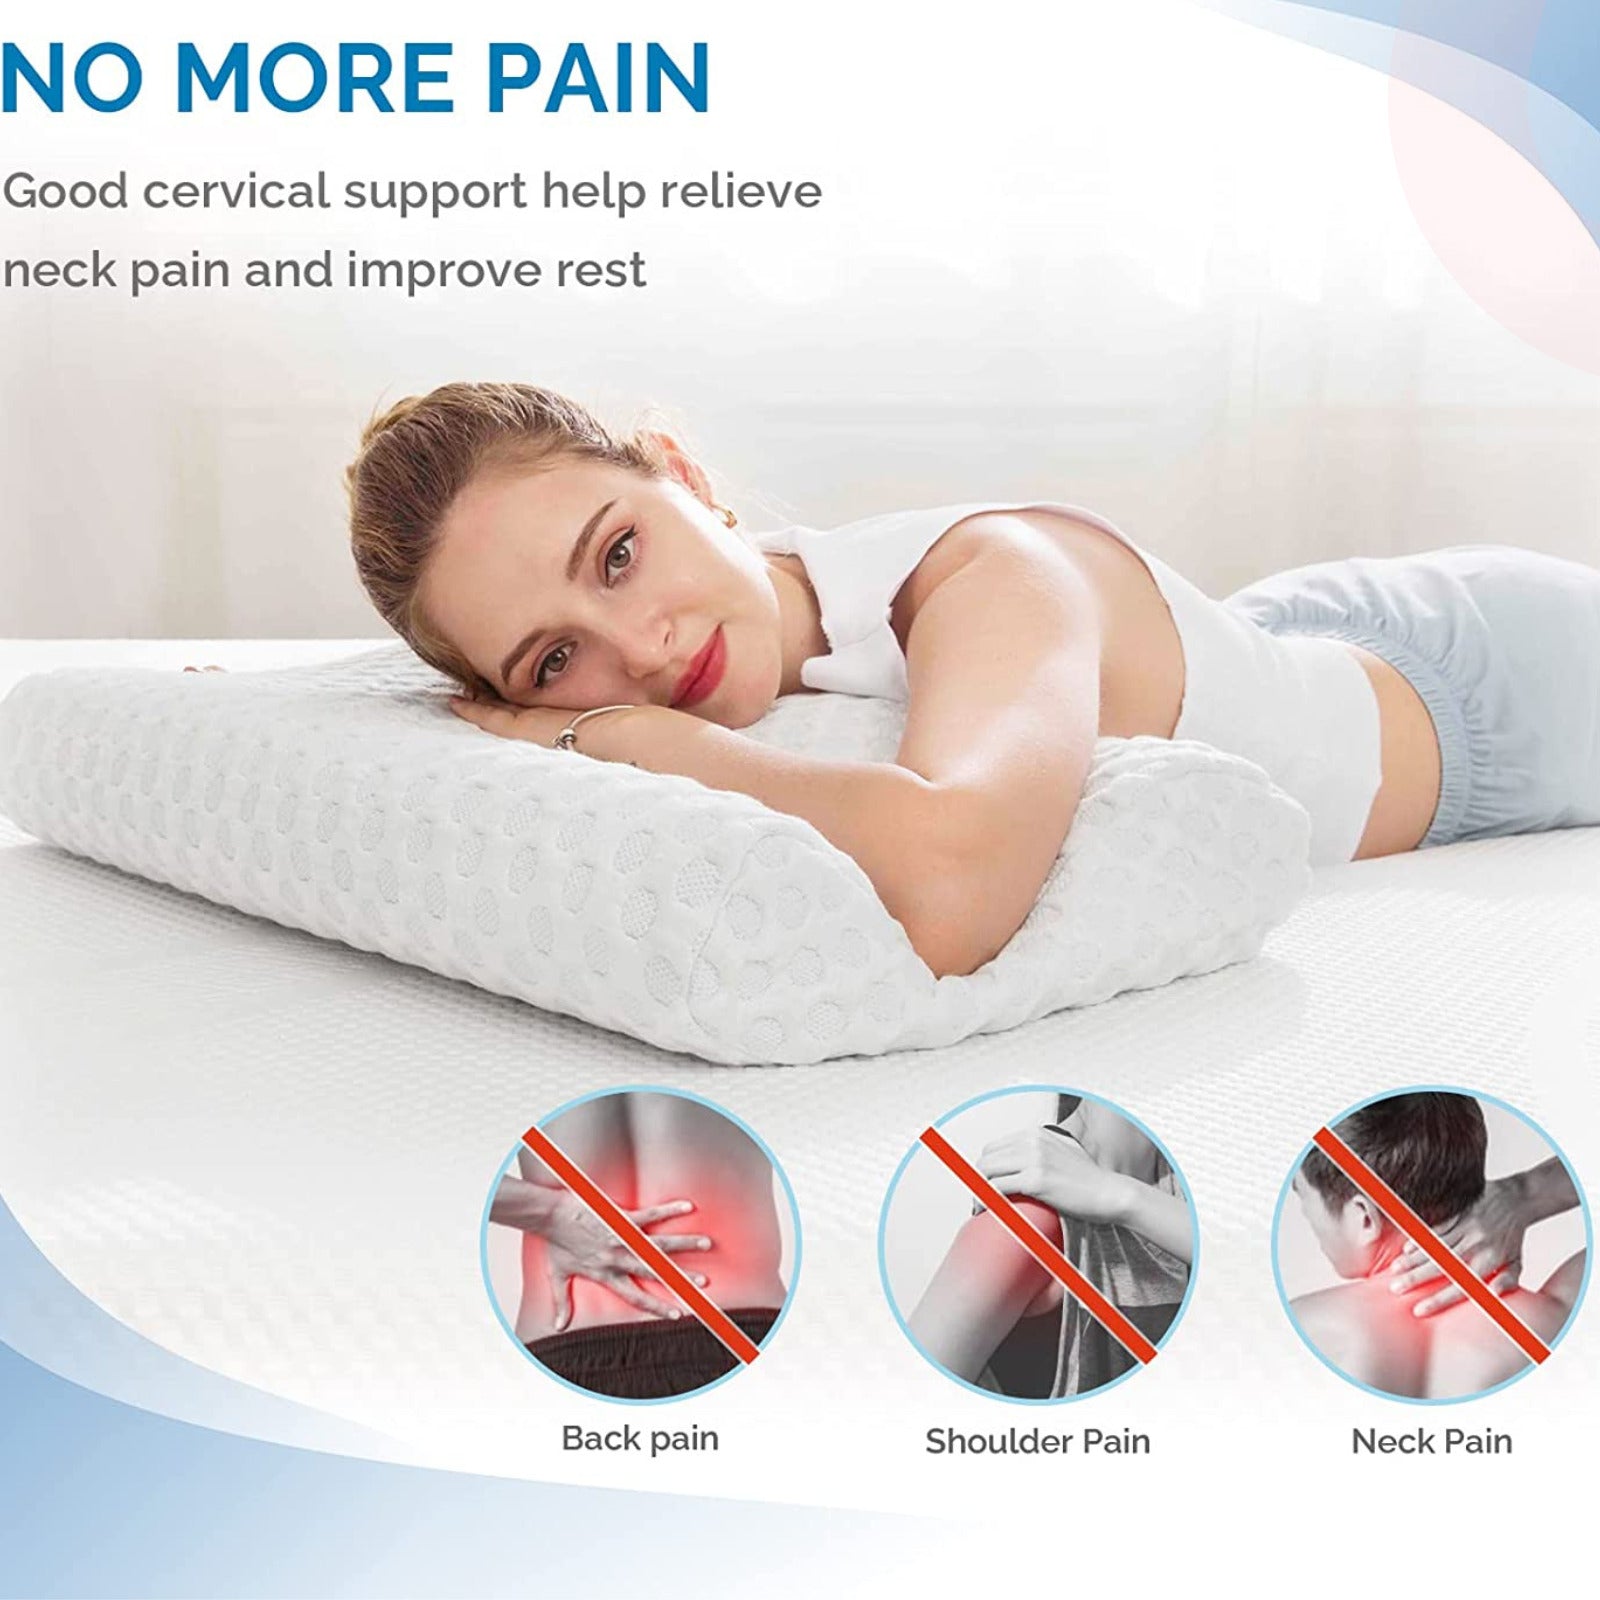 Orthopedic Contour Memory Foam Pillow Cervical Bed Pillow for Pain Relief  White